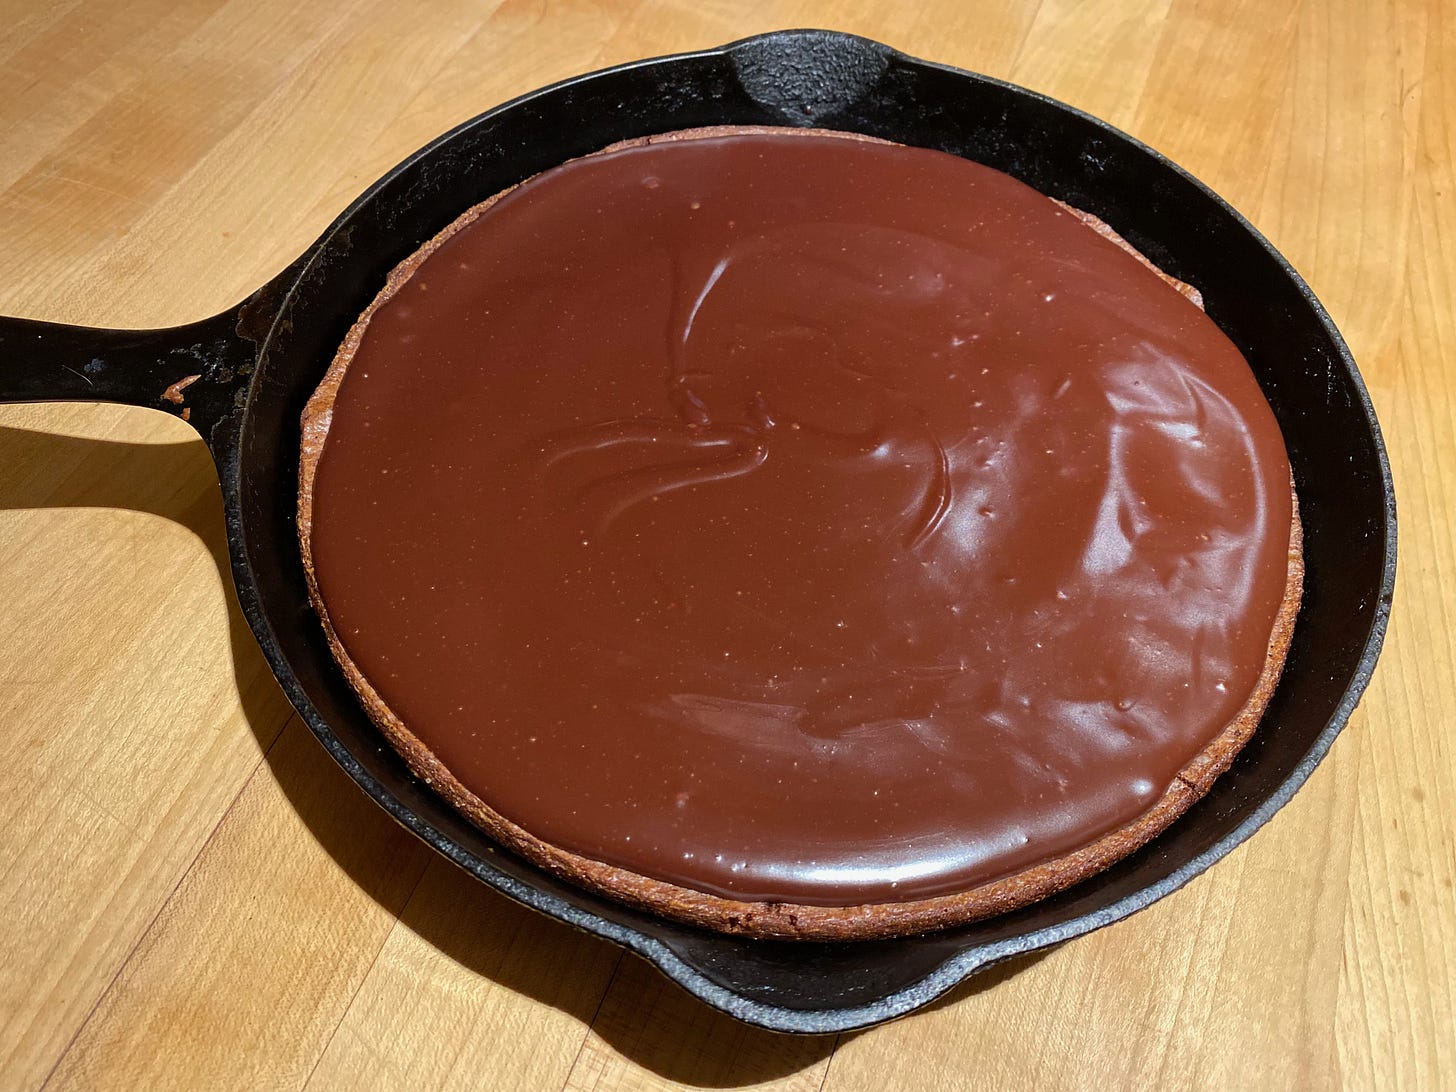 A cast iron pan holds a large round brownie, topped with a shiny chocolate ganache.